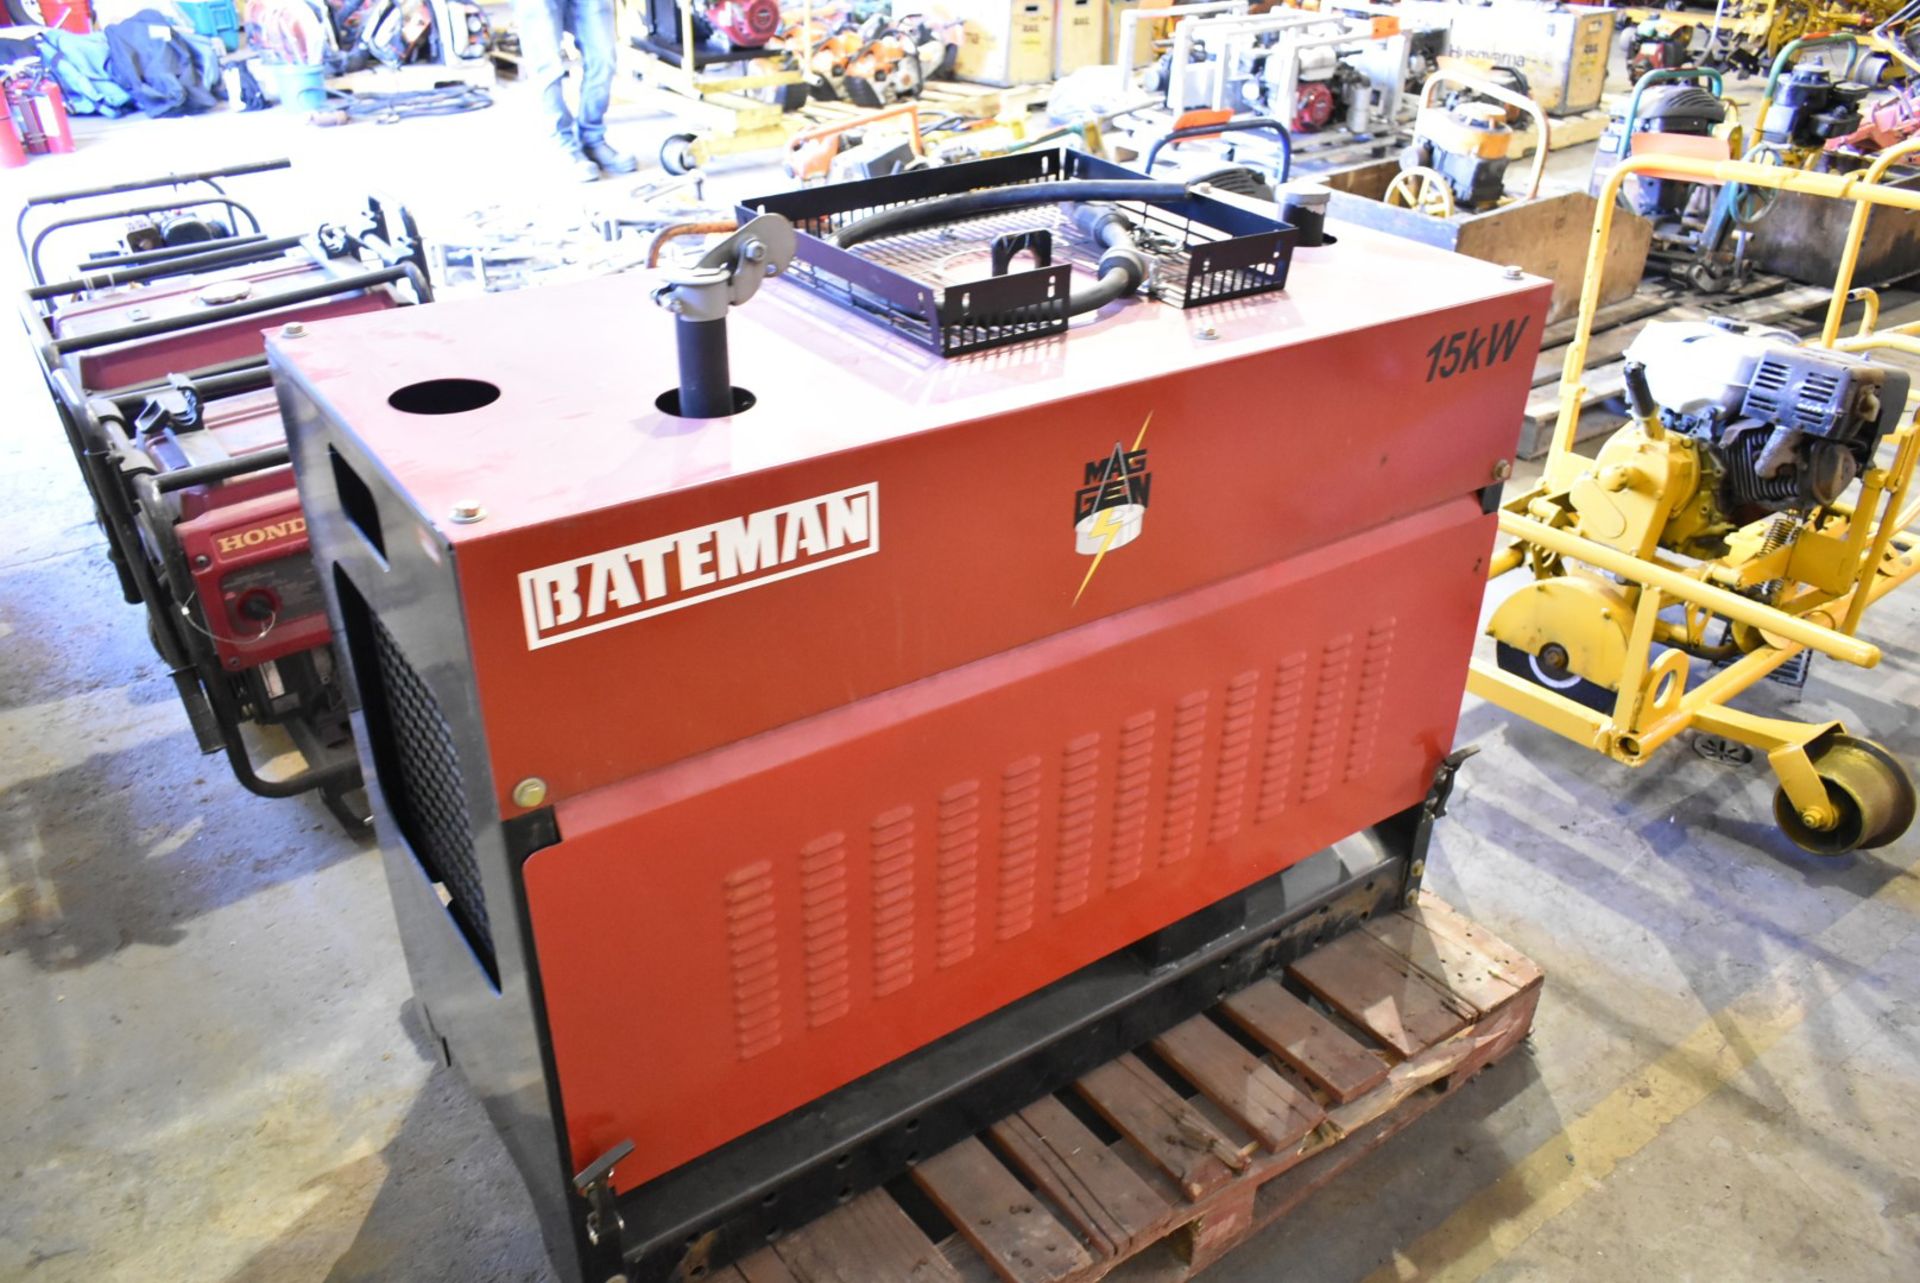 BATEMAN MAG-GEN 15KW GENERATOR WITH 0.8 HRS (RECORDED ON METER AT TIME OF LISTING (CI) - Image 2 of 3